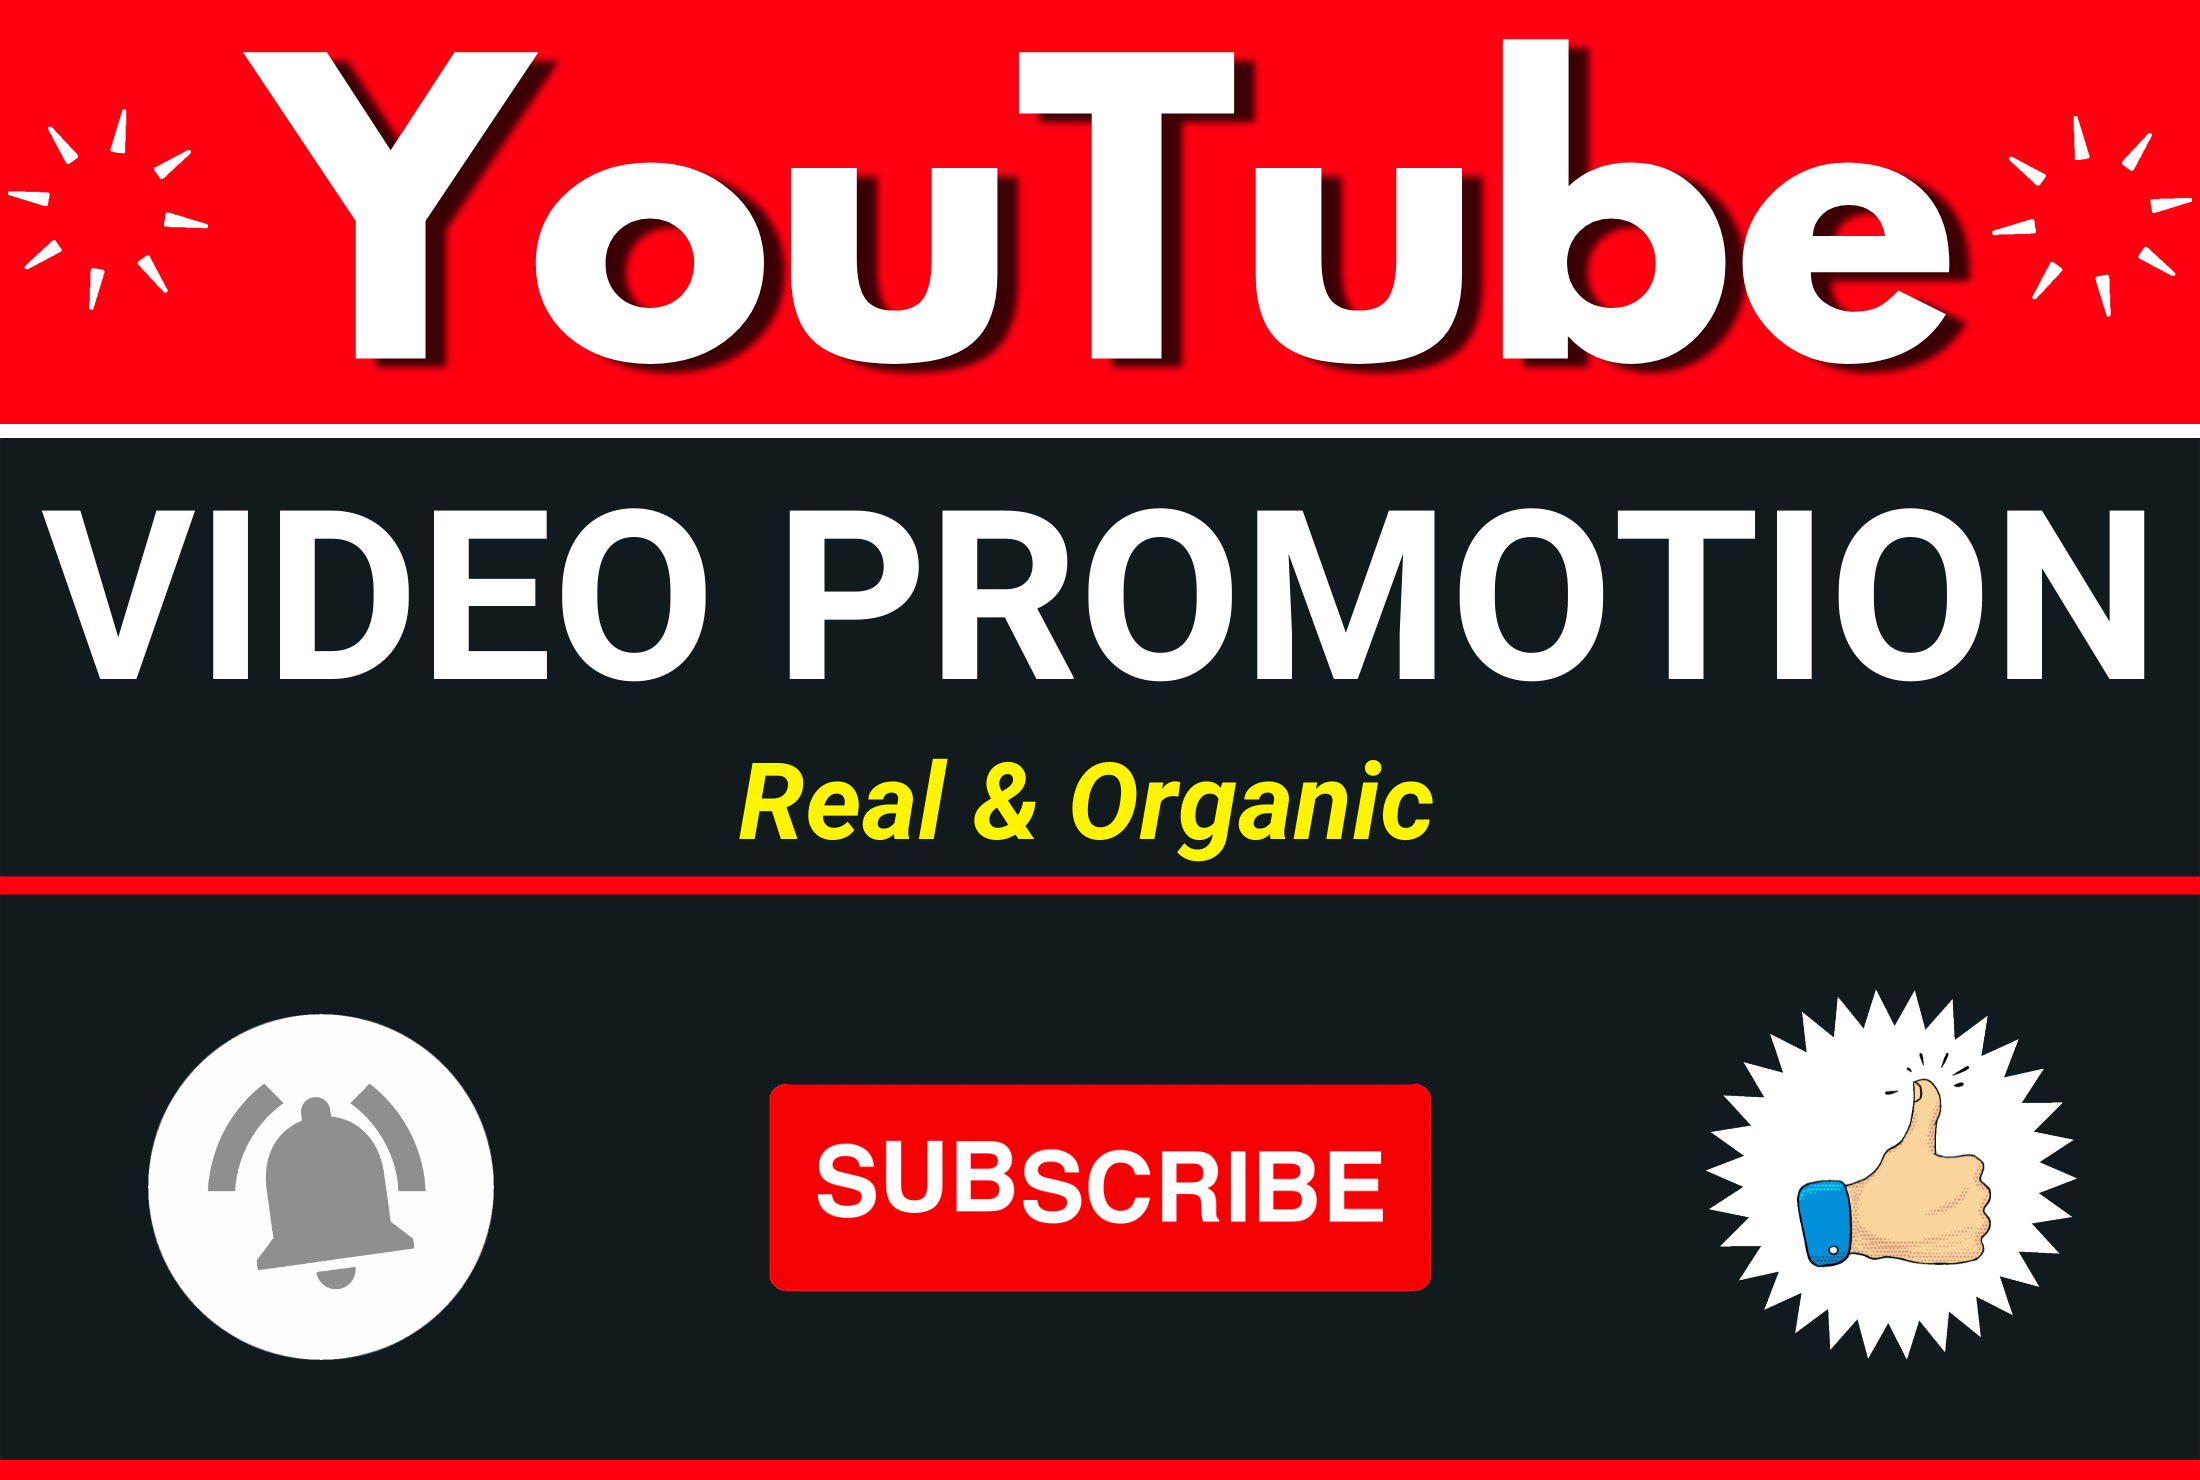 Super Fast High Quality YouTube Video & Chanel Promotion With Real and Organic User